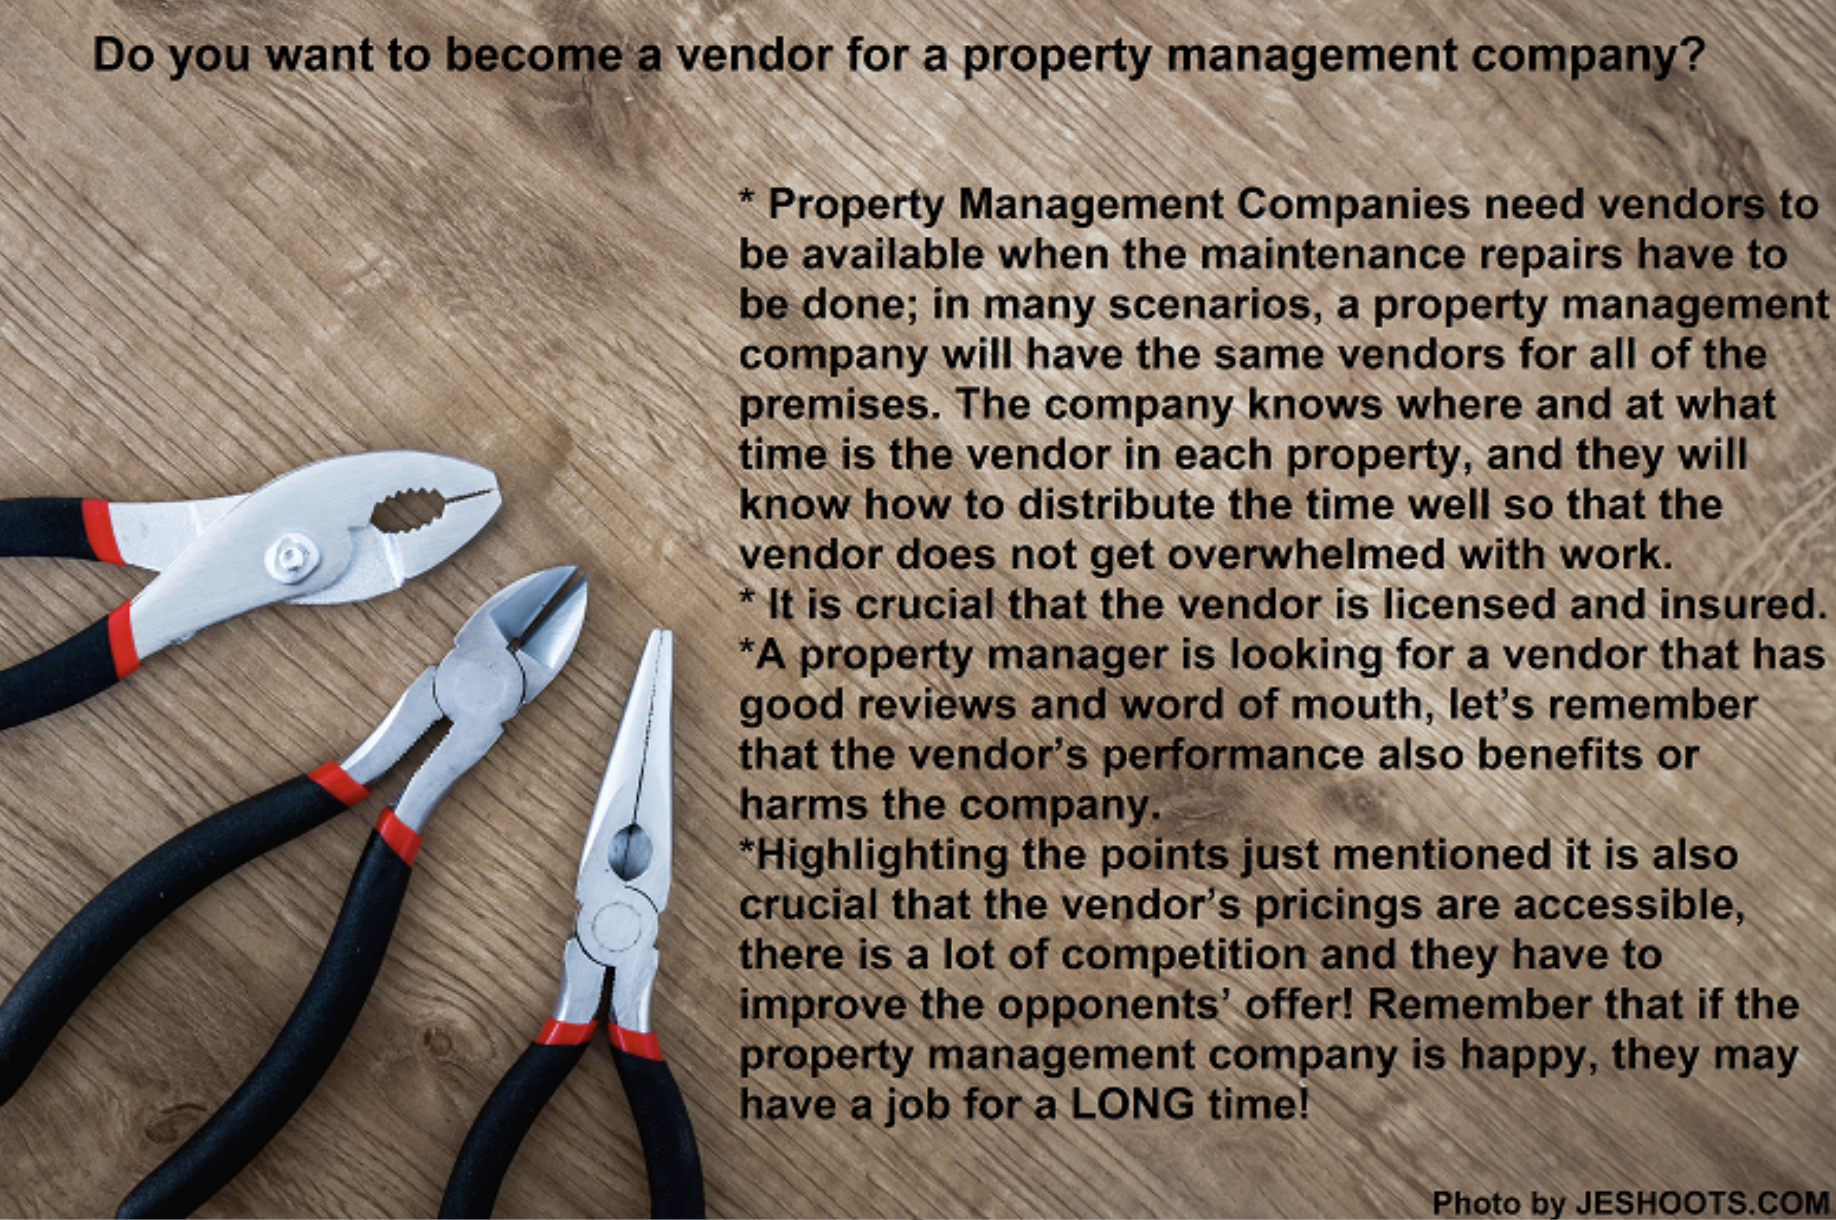 Do you want to become a vendor for a property management company?